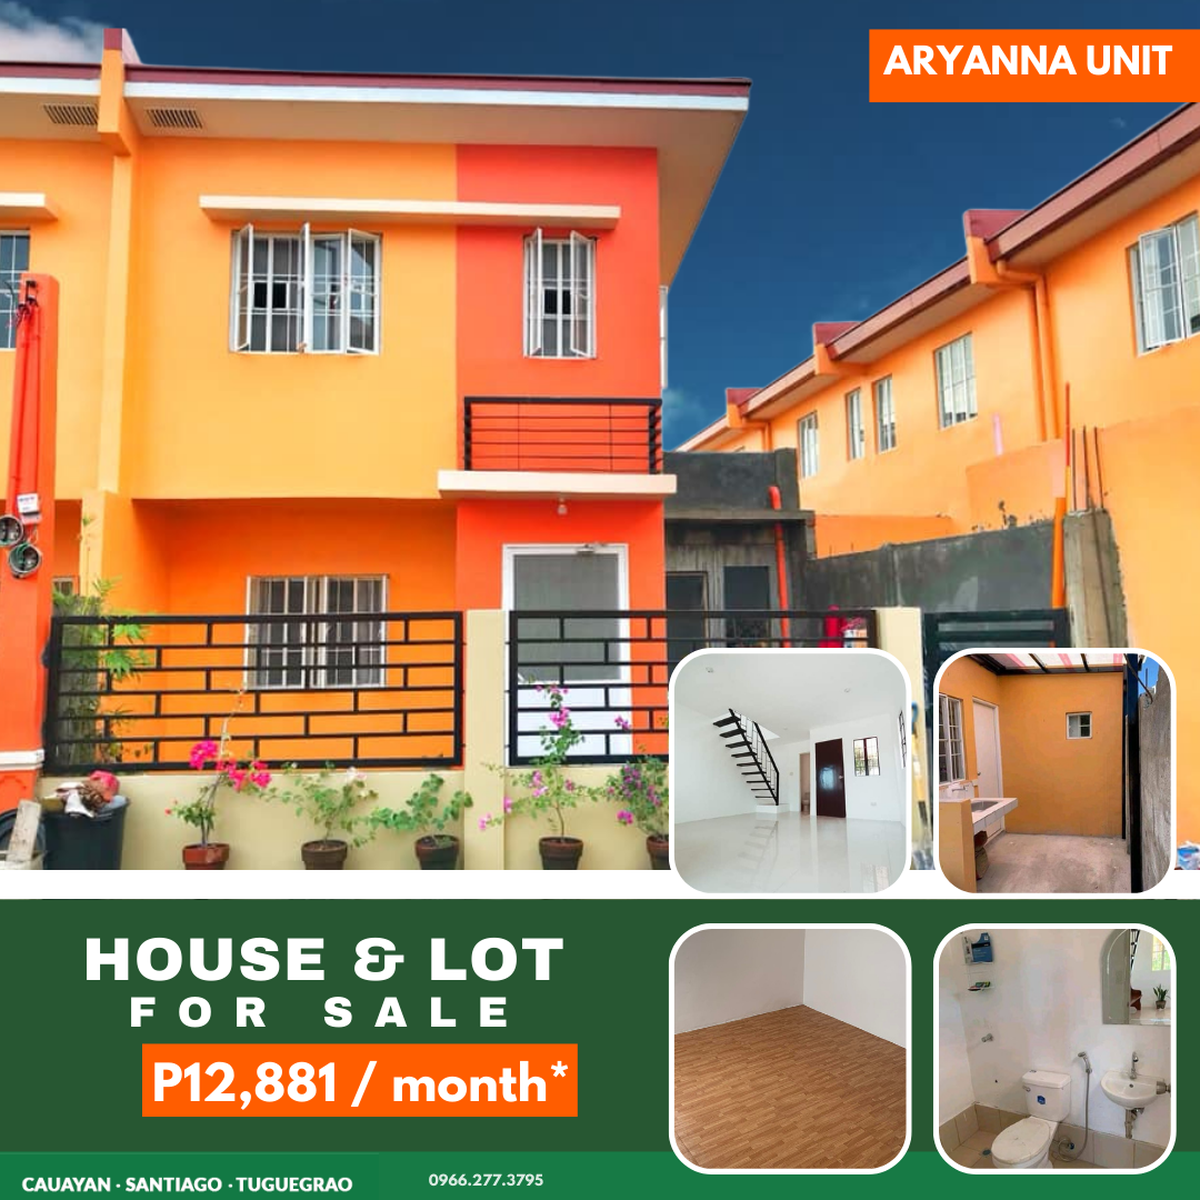 2 - bedrooms townhouse for sale in cauayan isabela